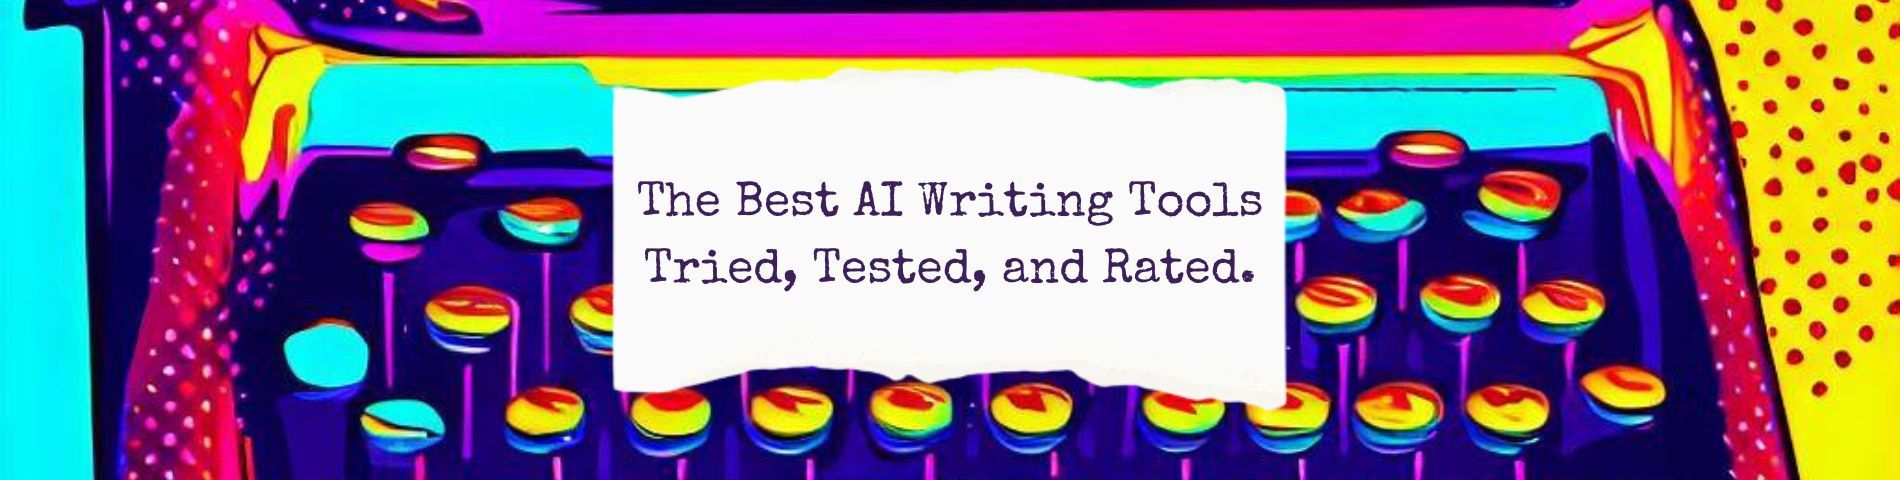 The Best AI Writing Tools Tried, Tested, and Rated.